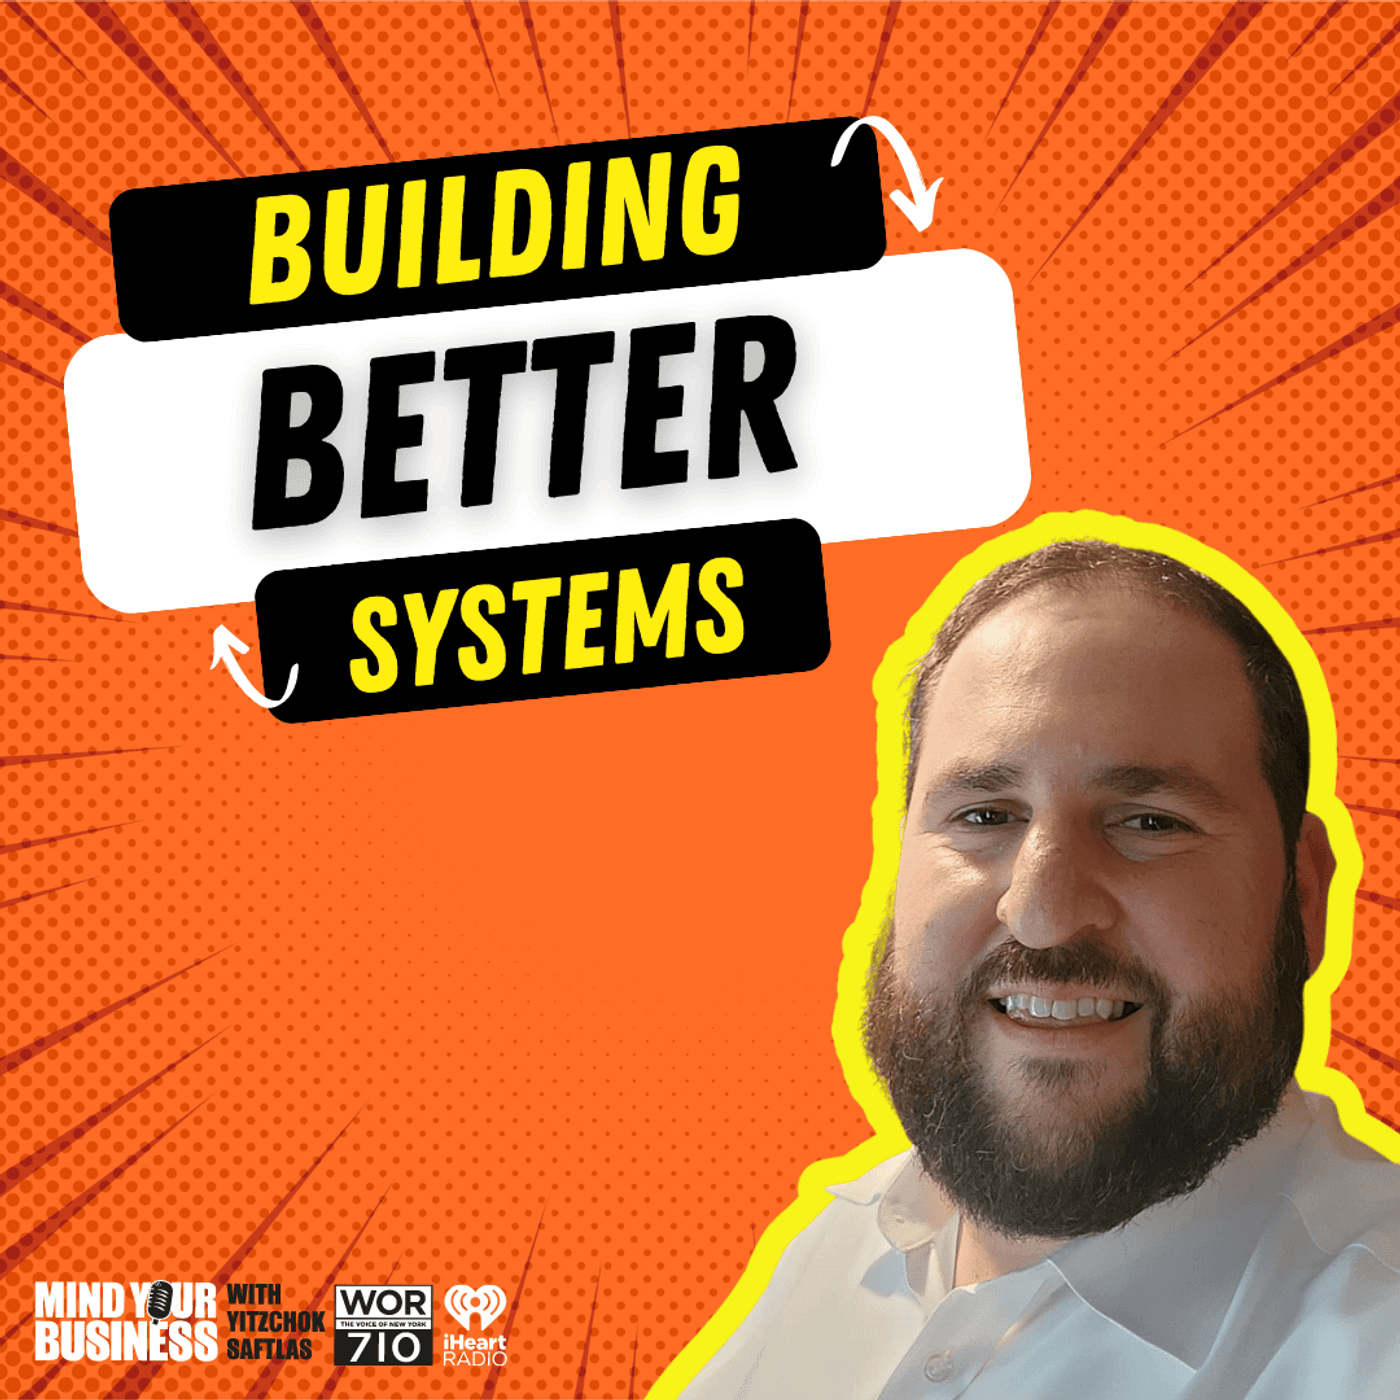 368: Building Better Systems featuring David Krengel, CEO of YD Wood Floors